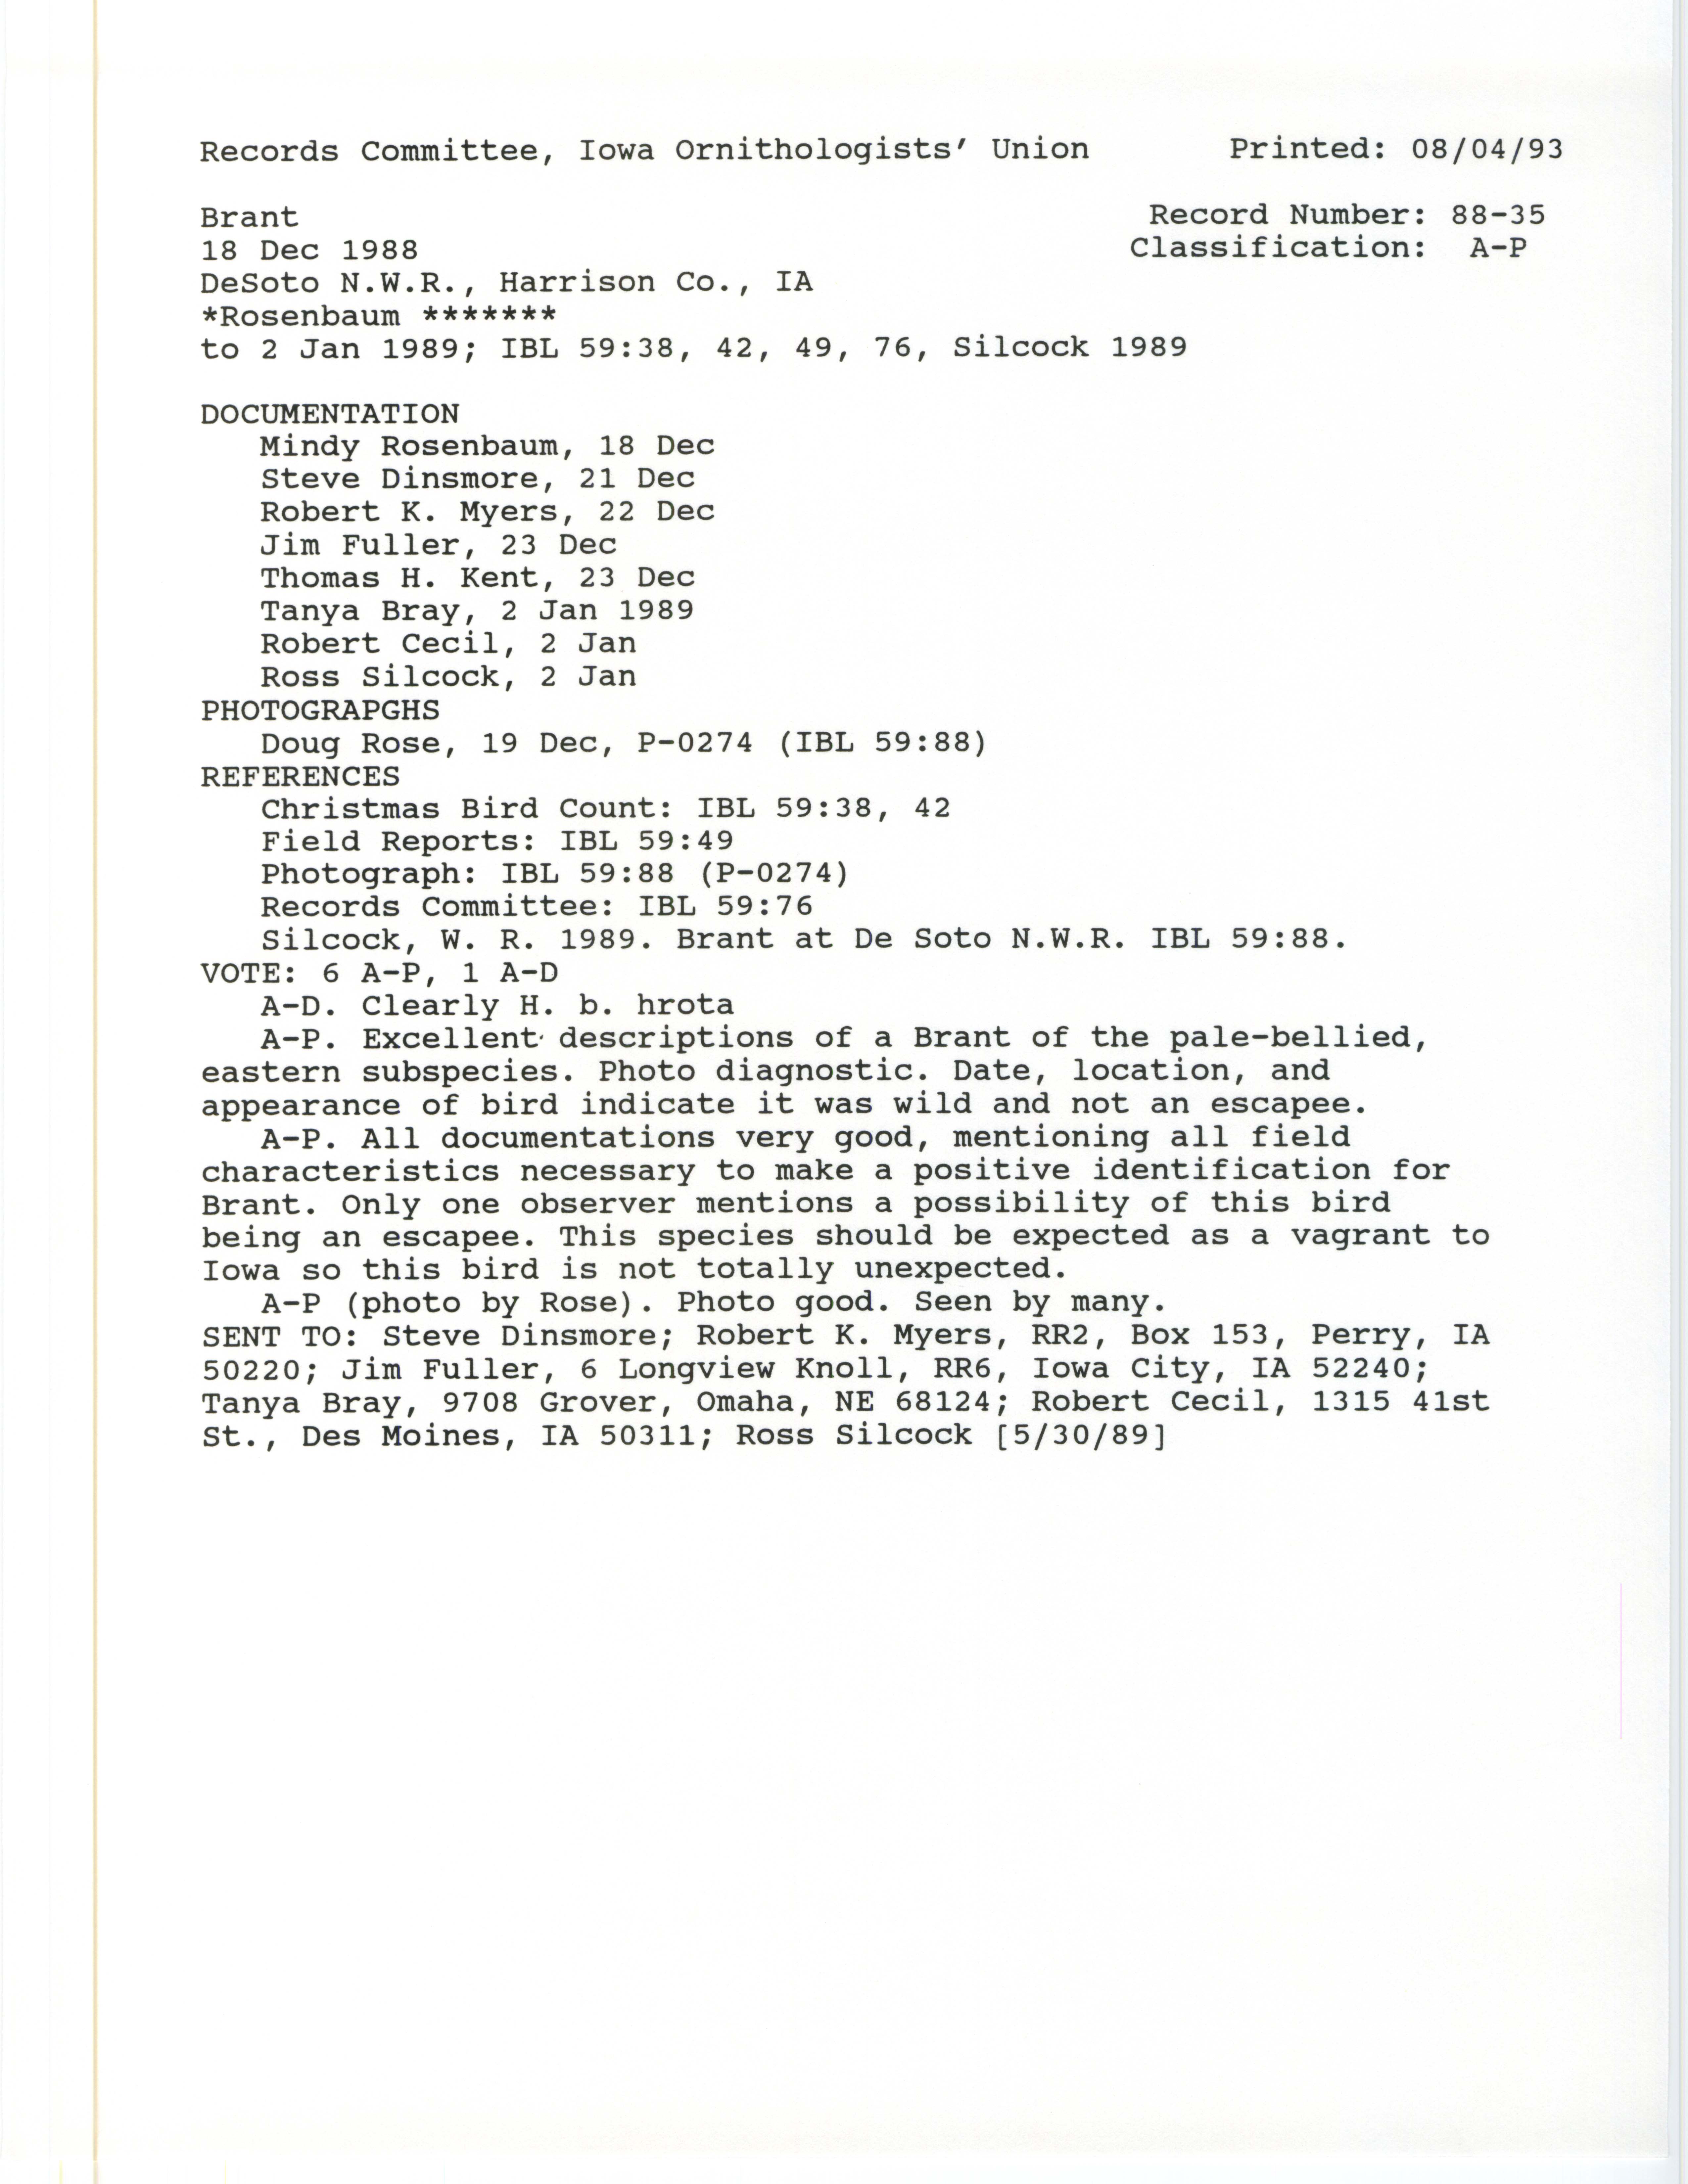 Records Committee review for rare bird sighting of Brant at De Soto National Wildlife Refuge, 1988